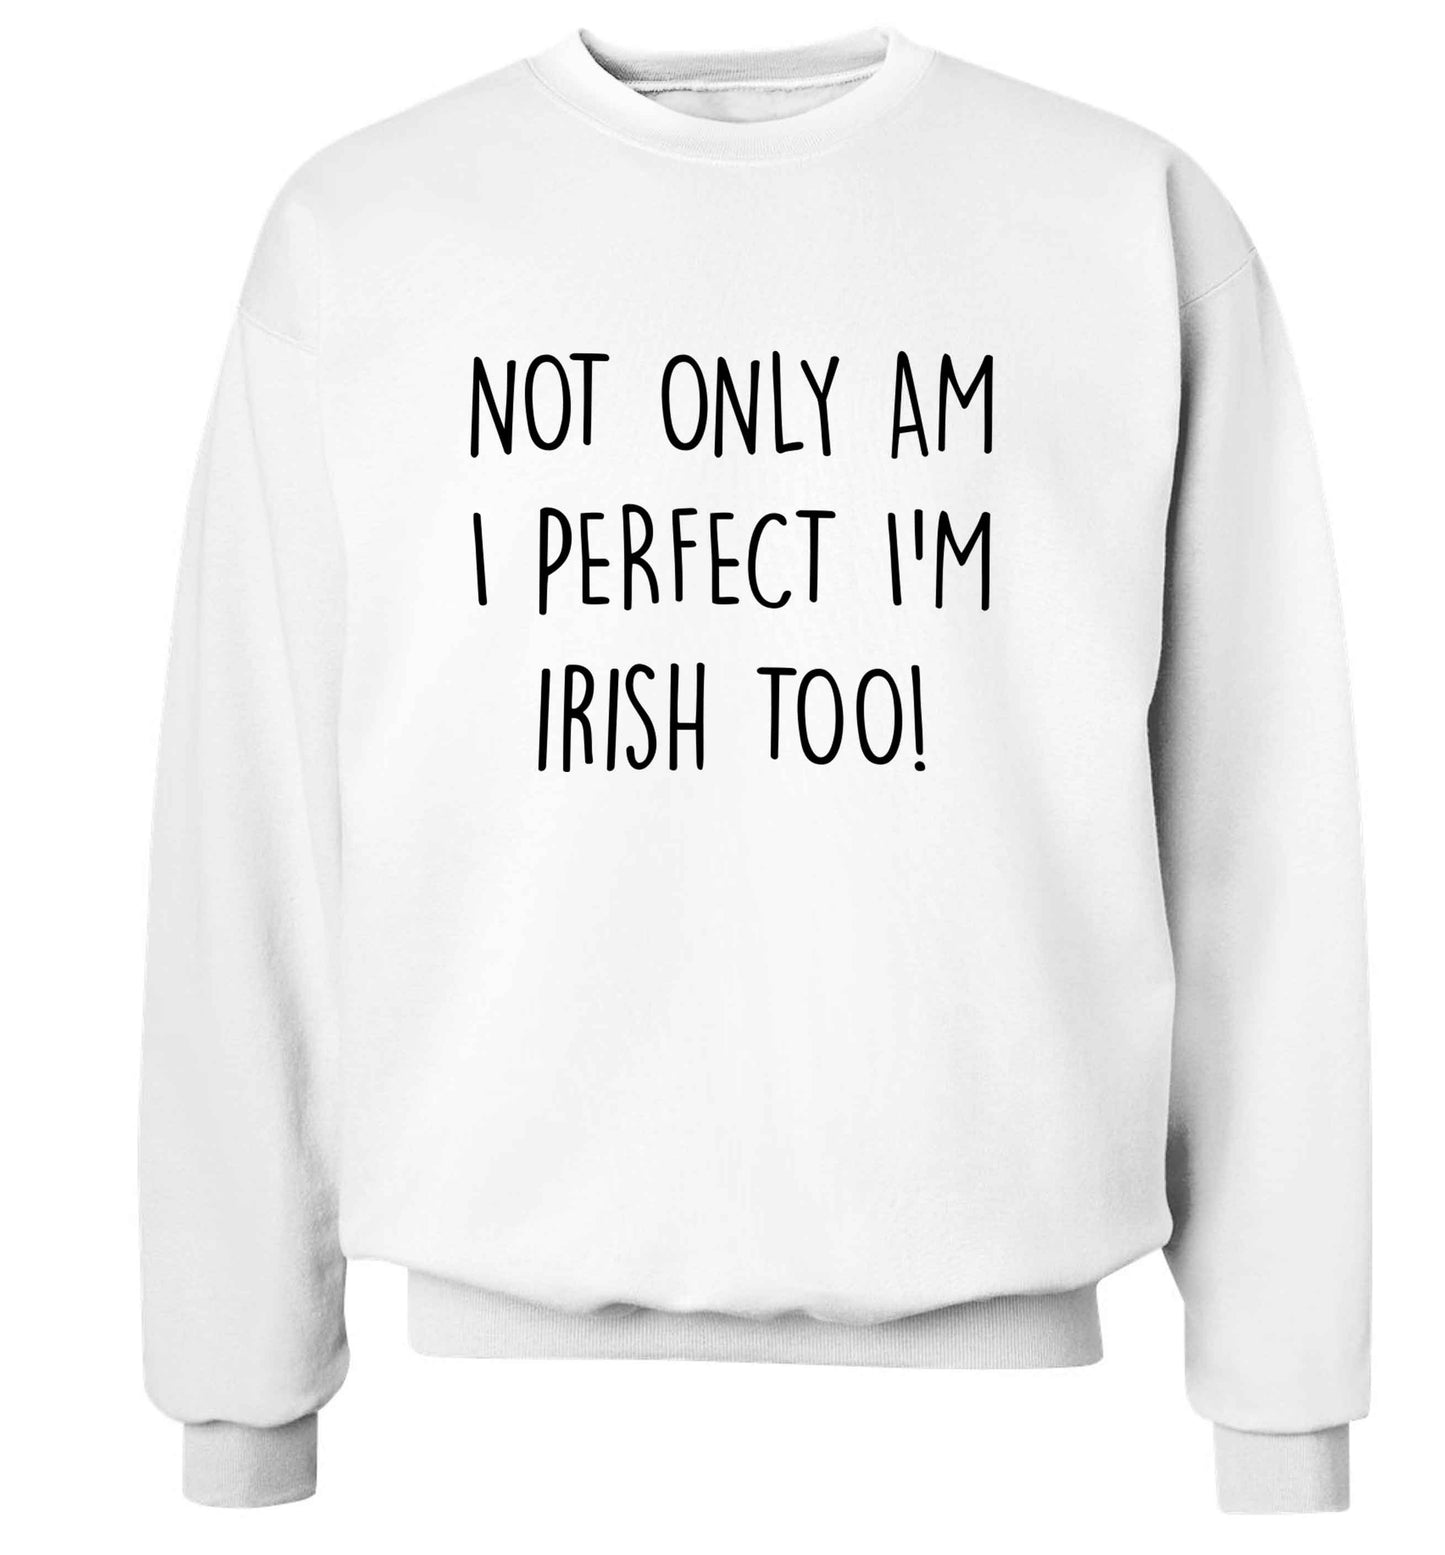 Not only am I perfect I'm Irish too! adult's unisex white sweater 2XL